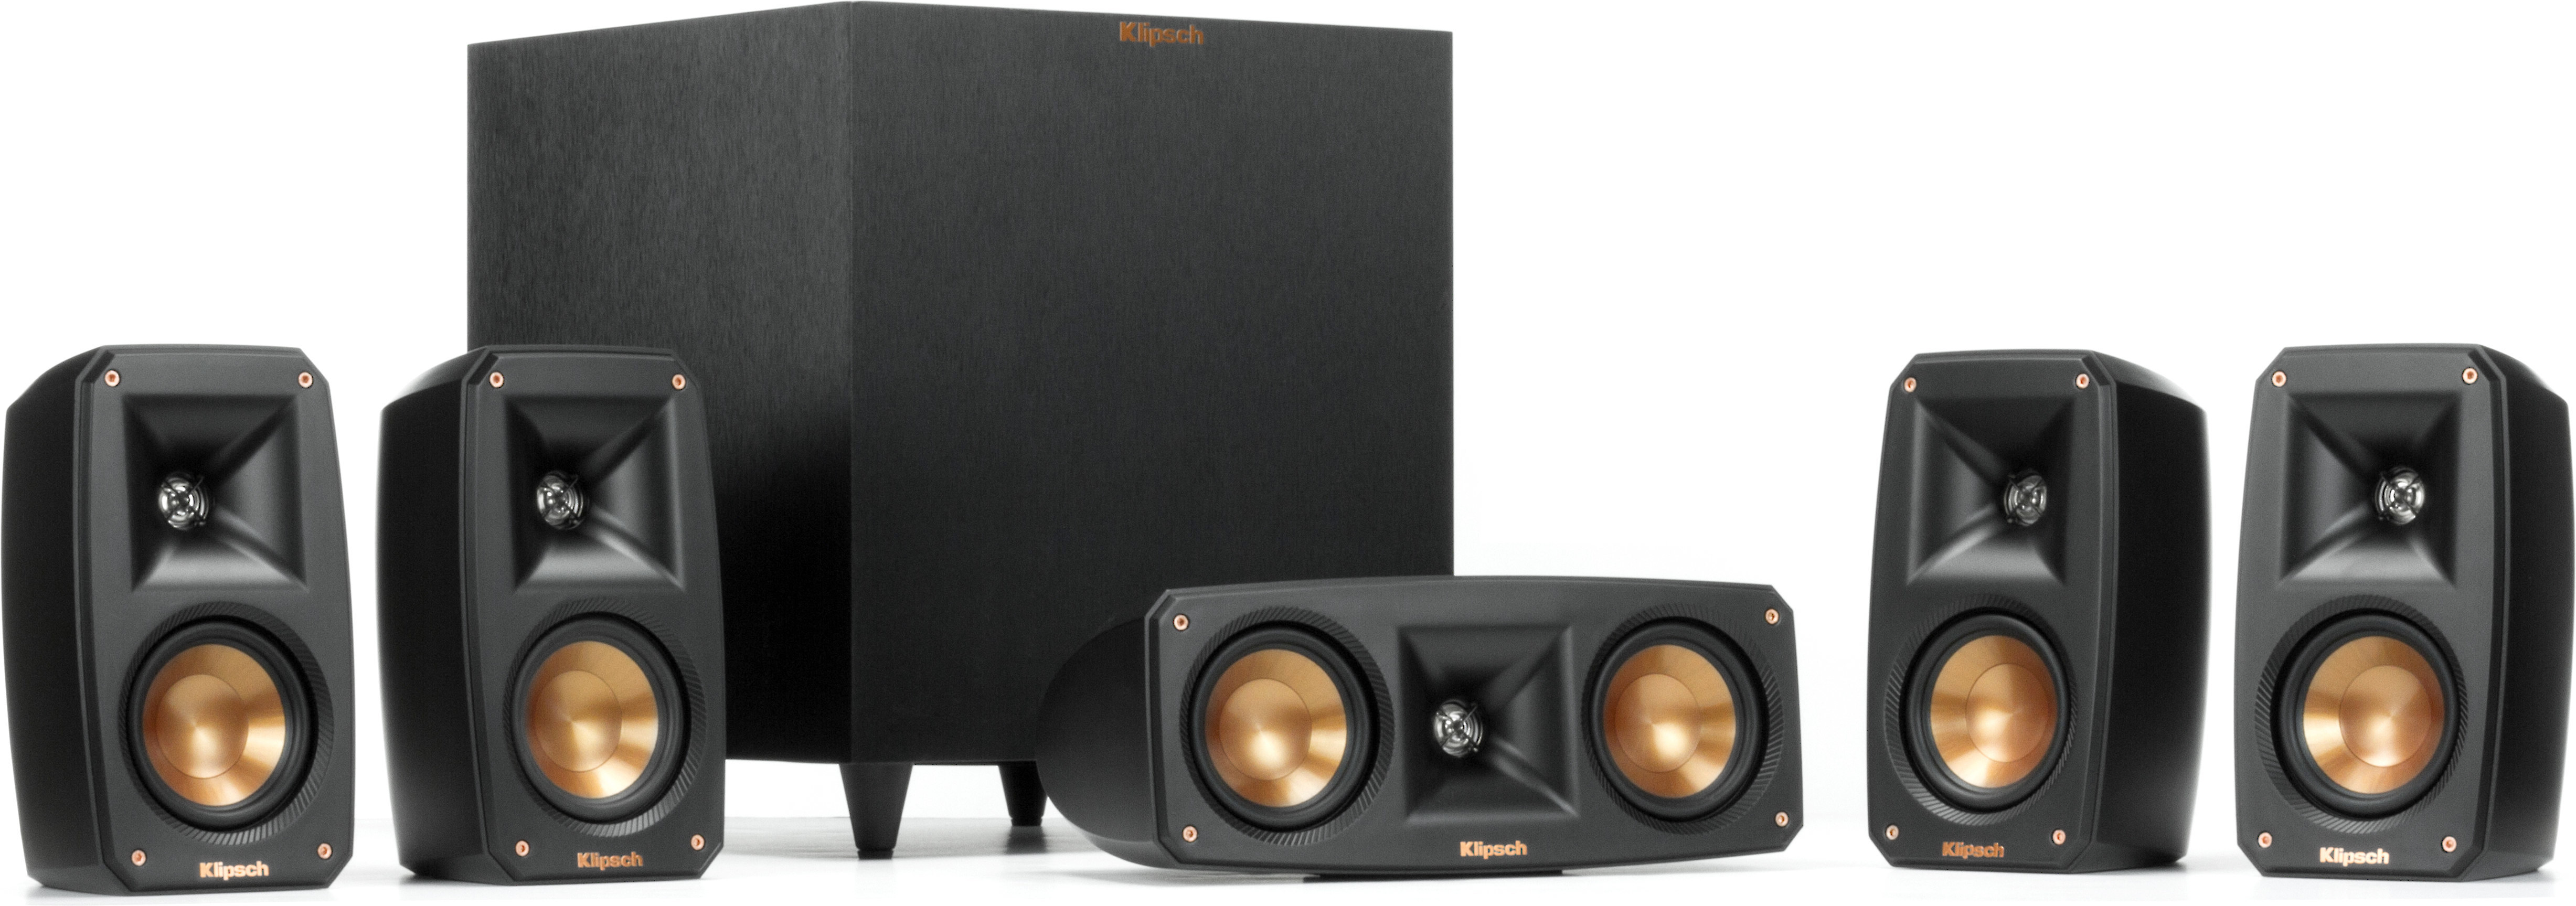 Wisa Enabled Reference Premiere Wireless Home Theater Speakers By Klipsch Best Portable B Wireless Home Theater System Wireless Home Theater Speakers Klipsch